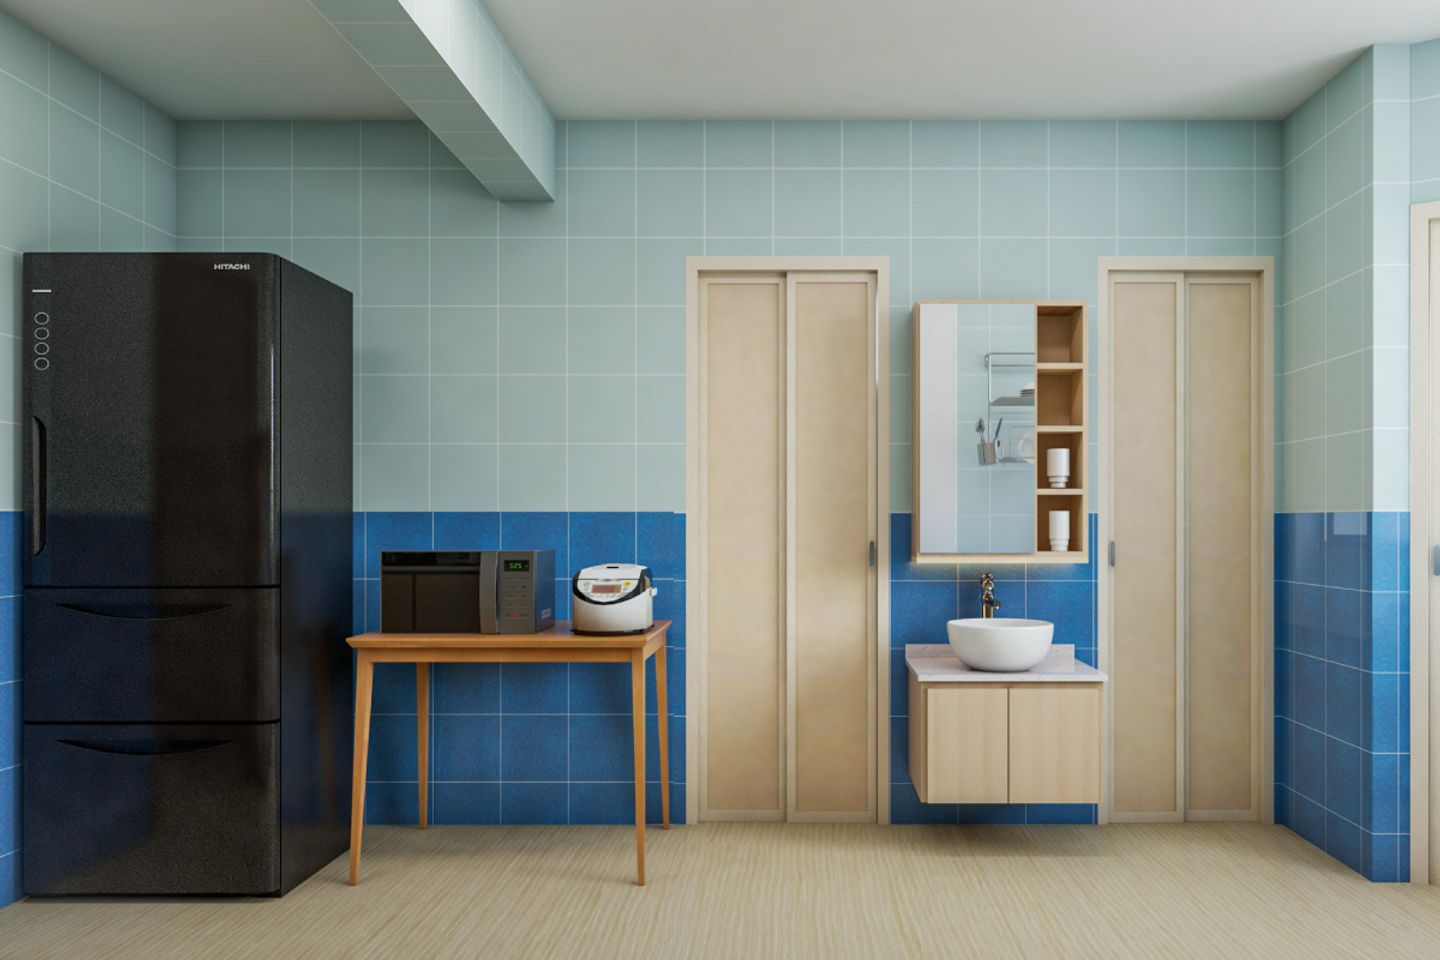 Dark And Light Blue Kitchen Wall Tiles With A Matte Finish - Livspace